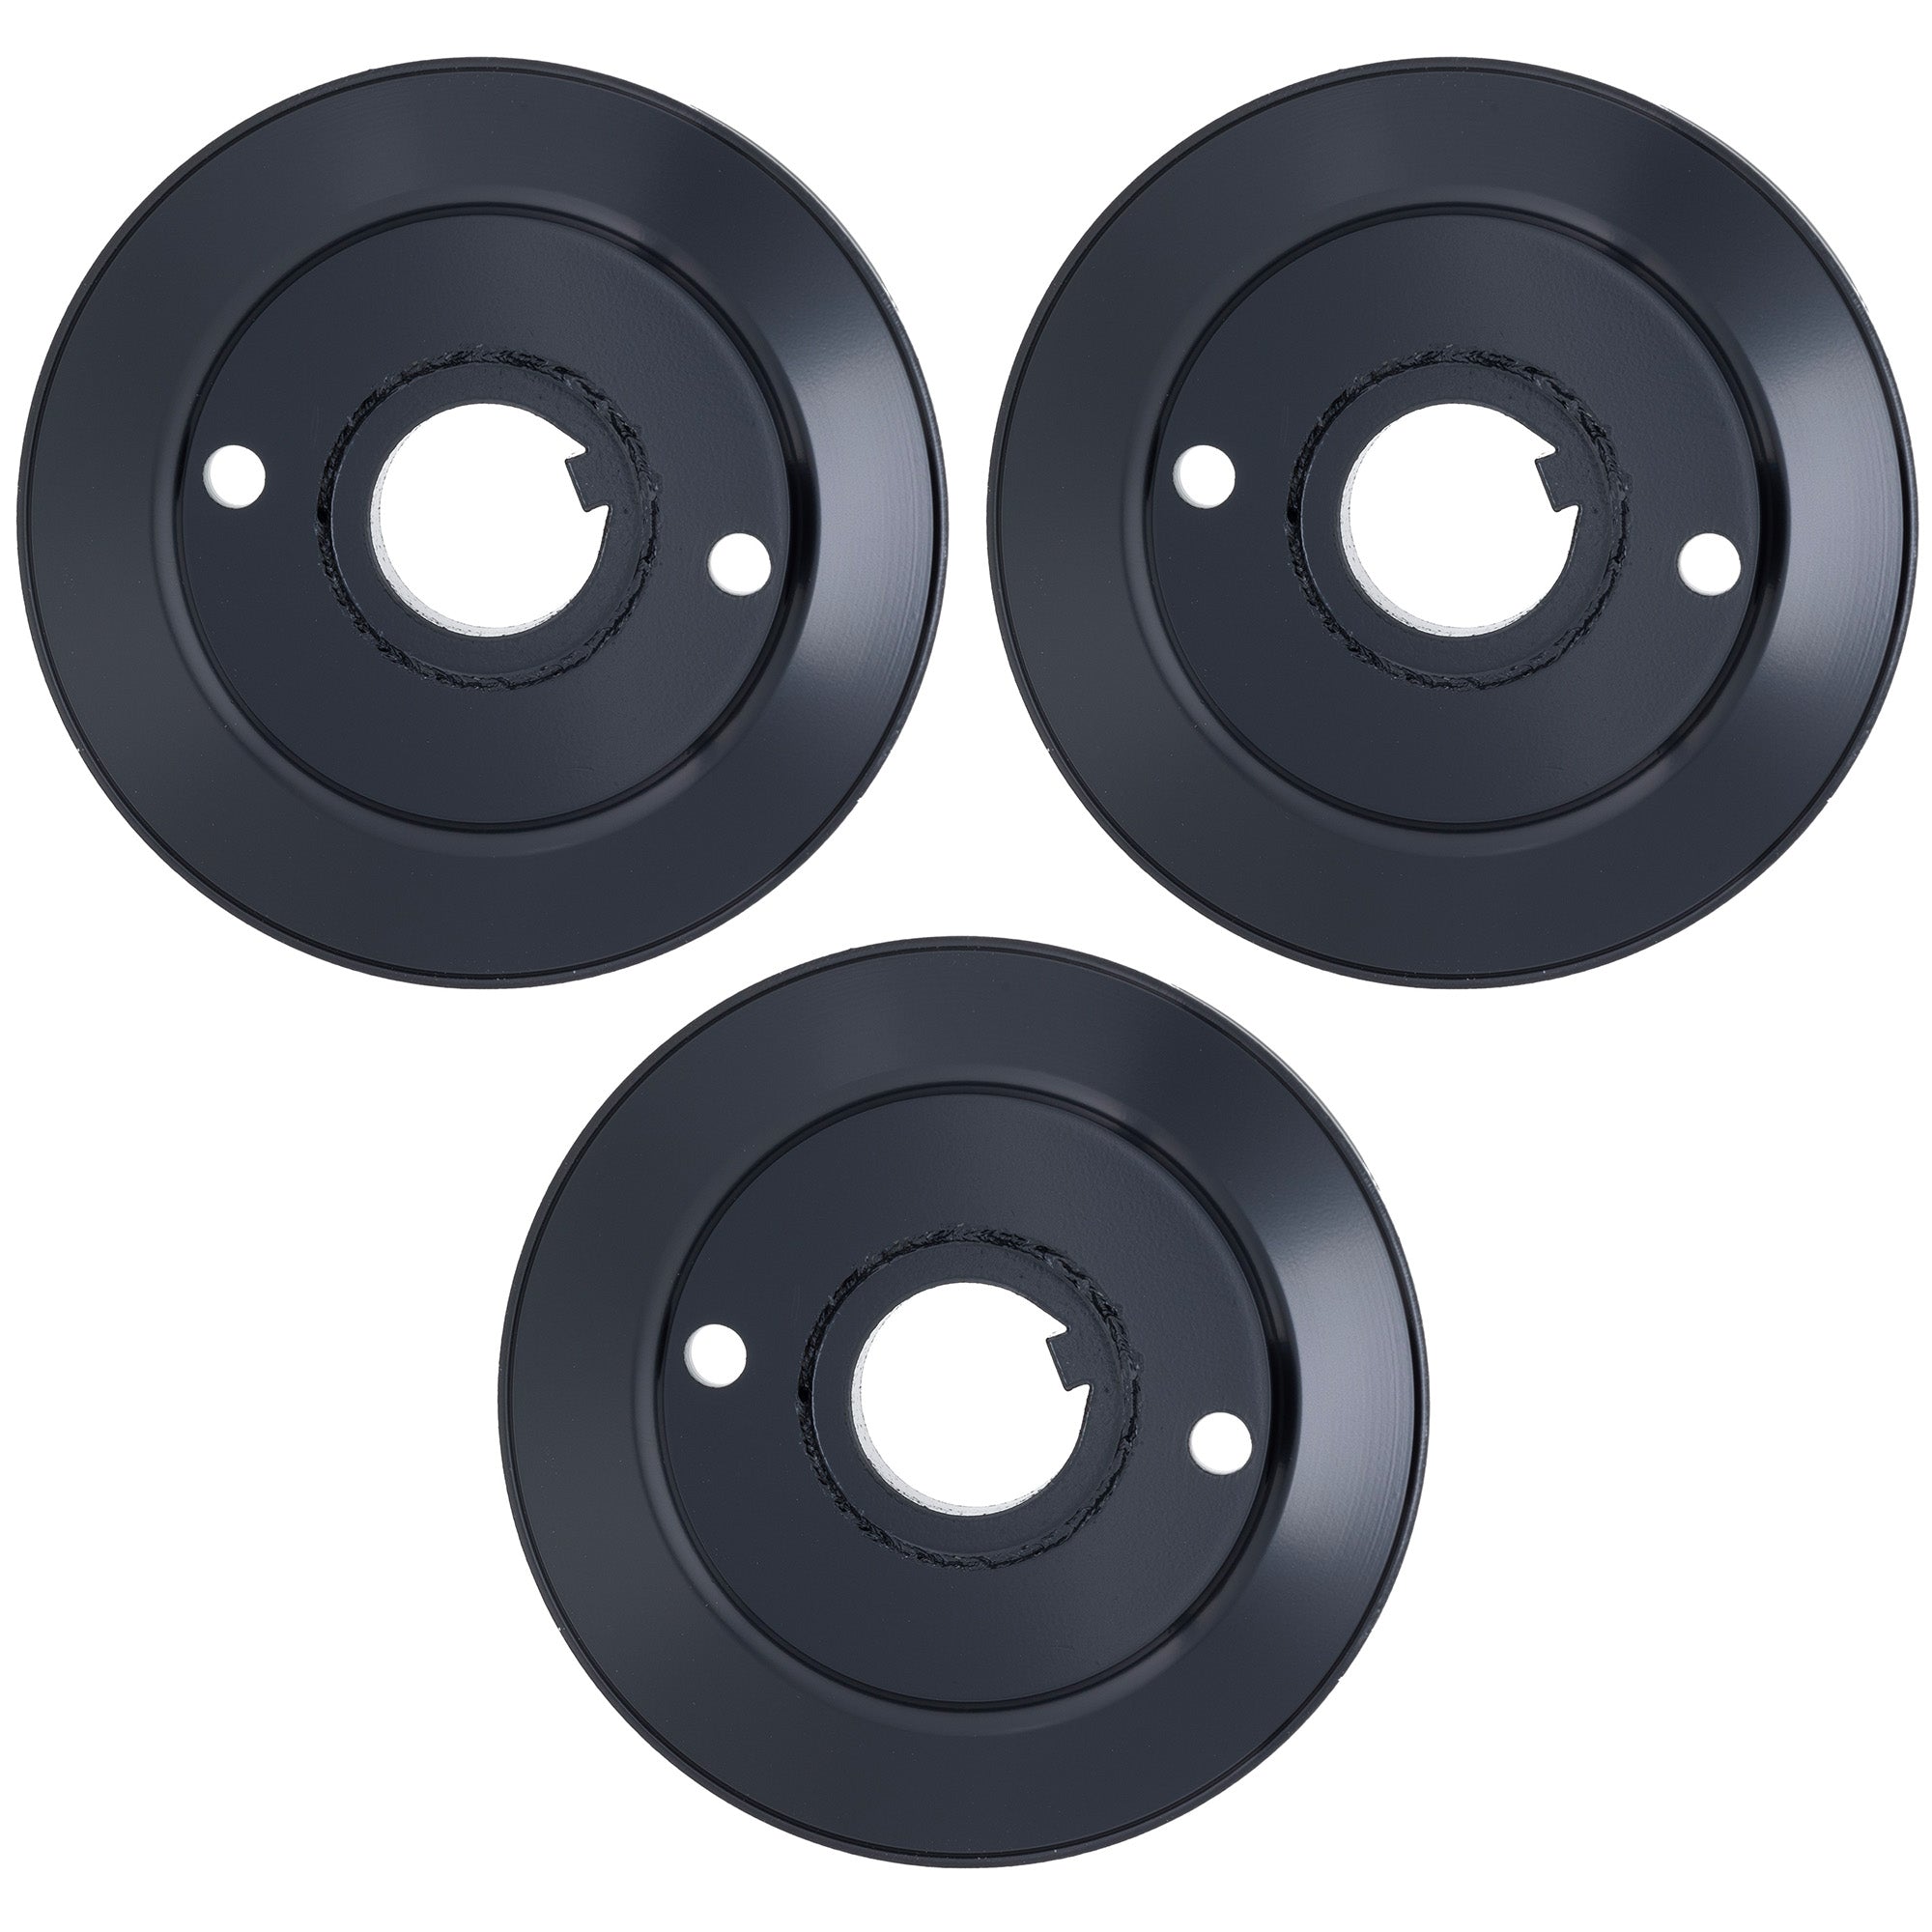 Blade Spindle Belt Pulley Deck Kit For Ariens Gravely MK1010083